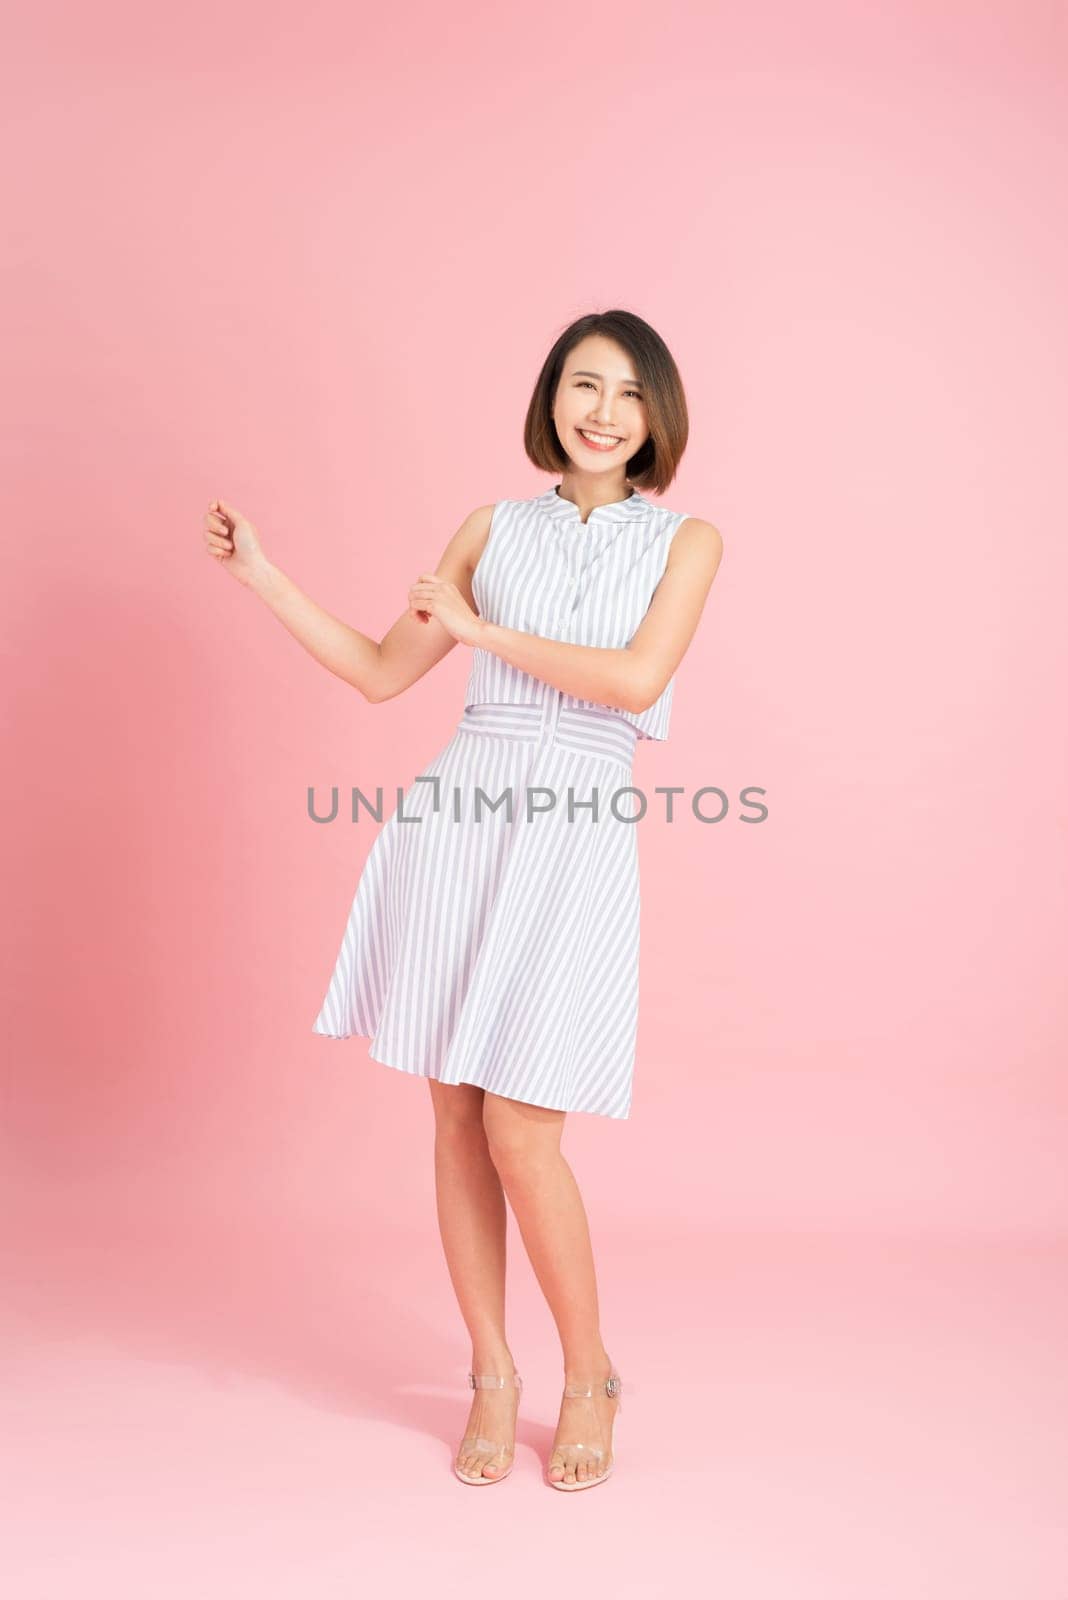 Confident girl laughing at camera. Studio shot of elegant white woman isolated on yellow background. by makidotvn